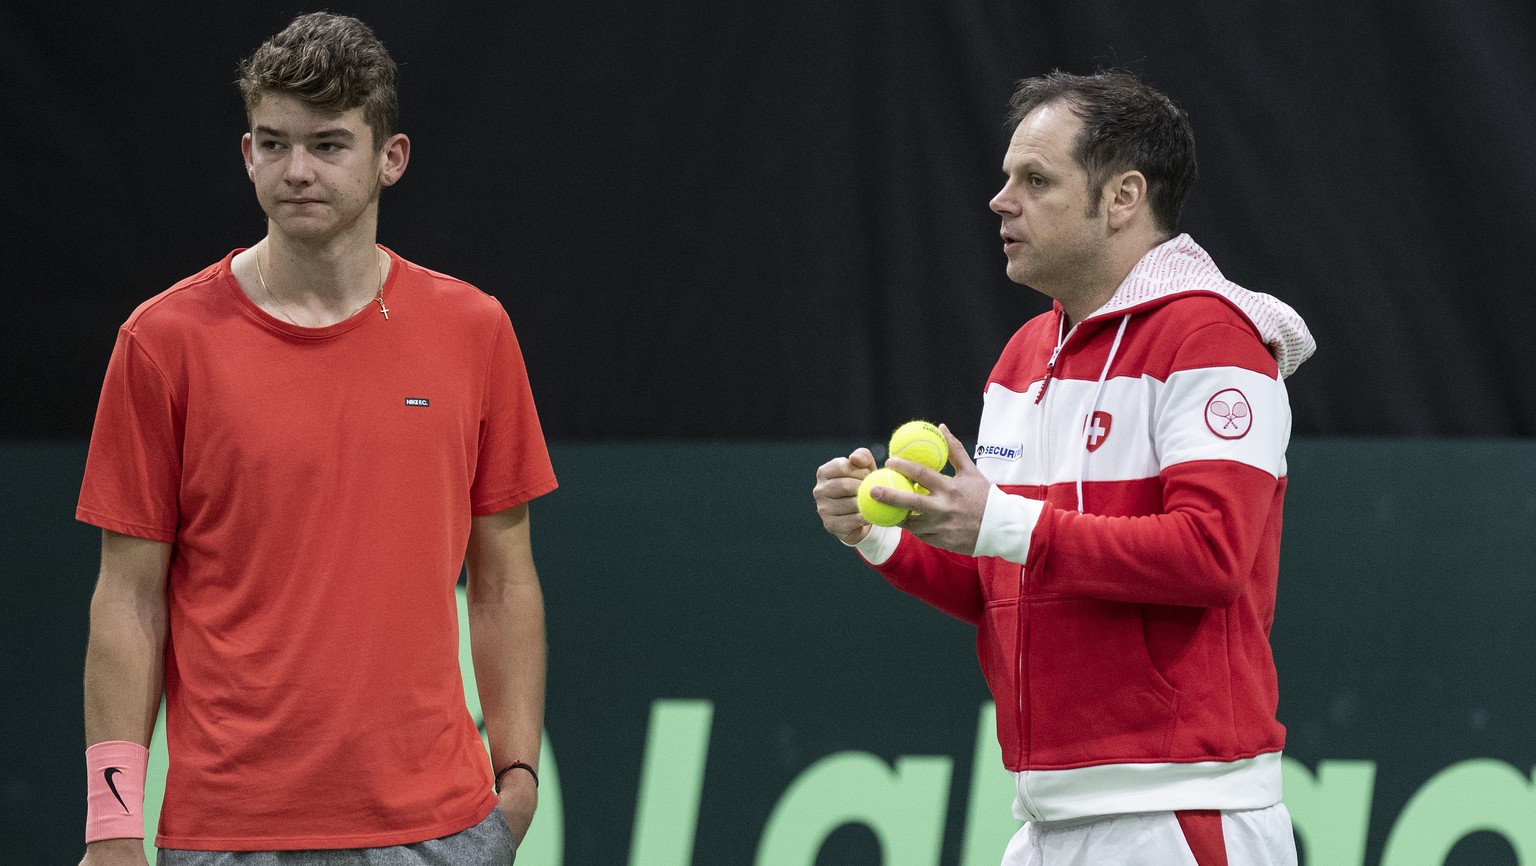 Switzerland&#039;s Davis Cup team captain Severin Luethi, right, and his team player Jerome Kym, left, look on during a training session in the Swiss Tennis Arena in Biel, Switzerland, on Thursday, Ja ...